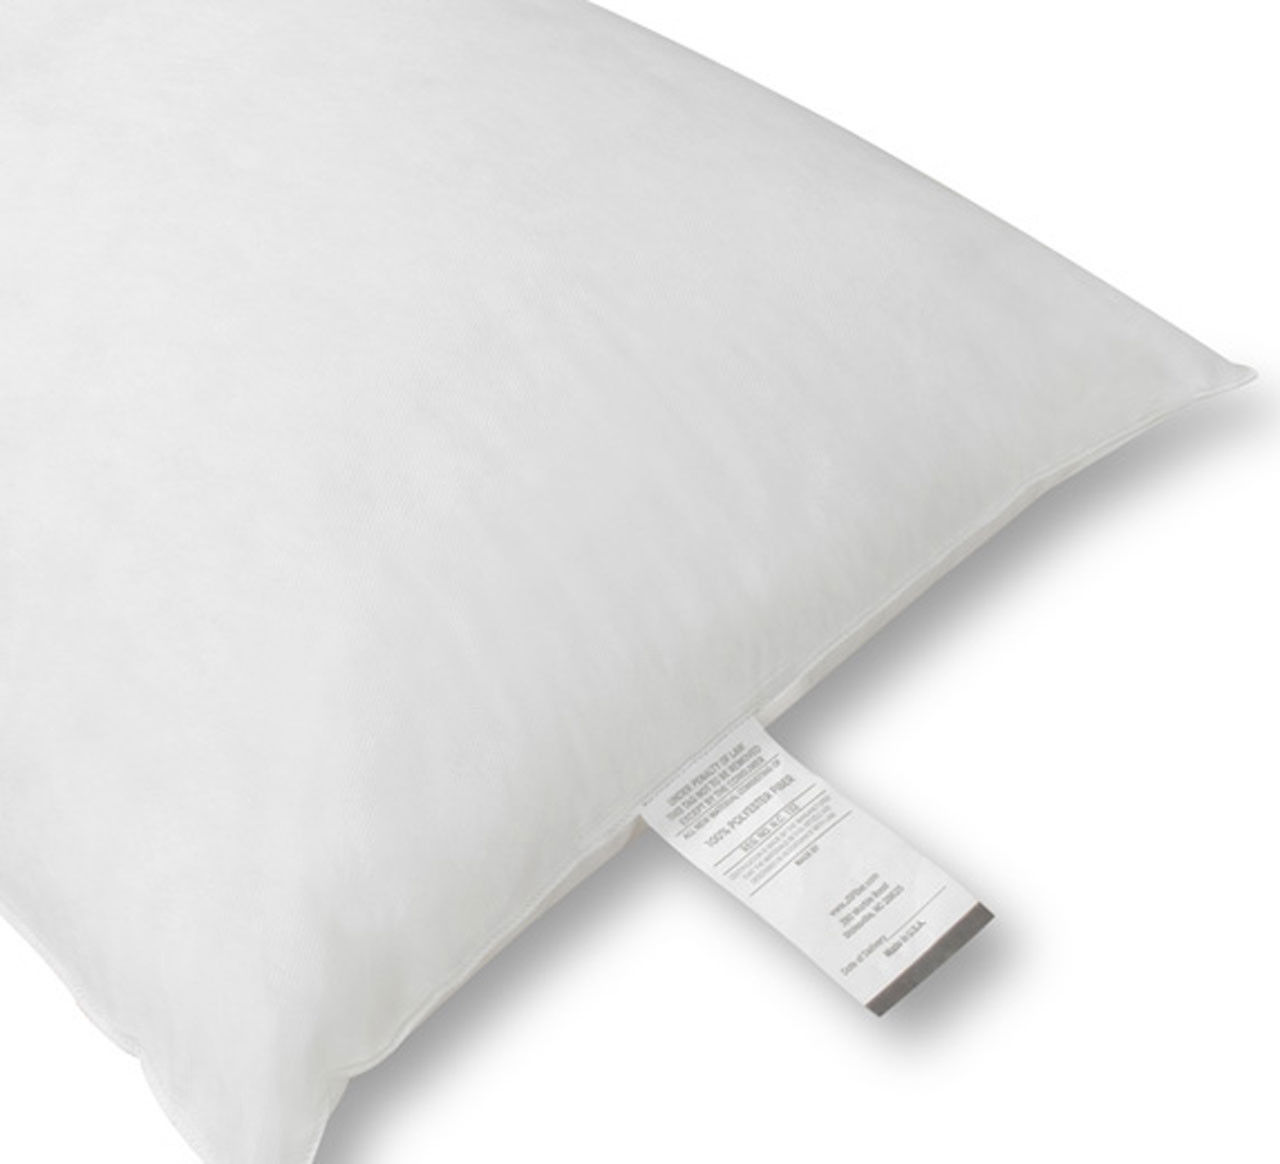 What sizes are available for Days Inn Pillows?